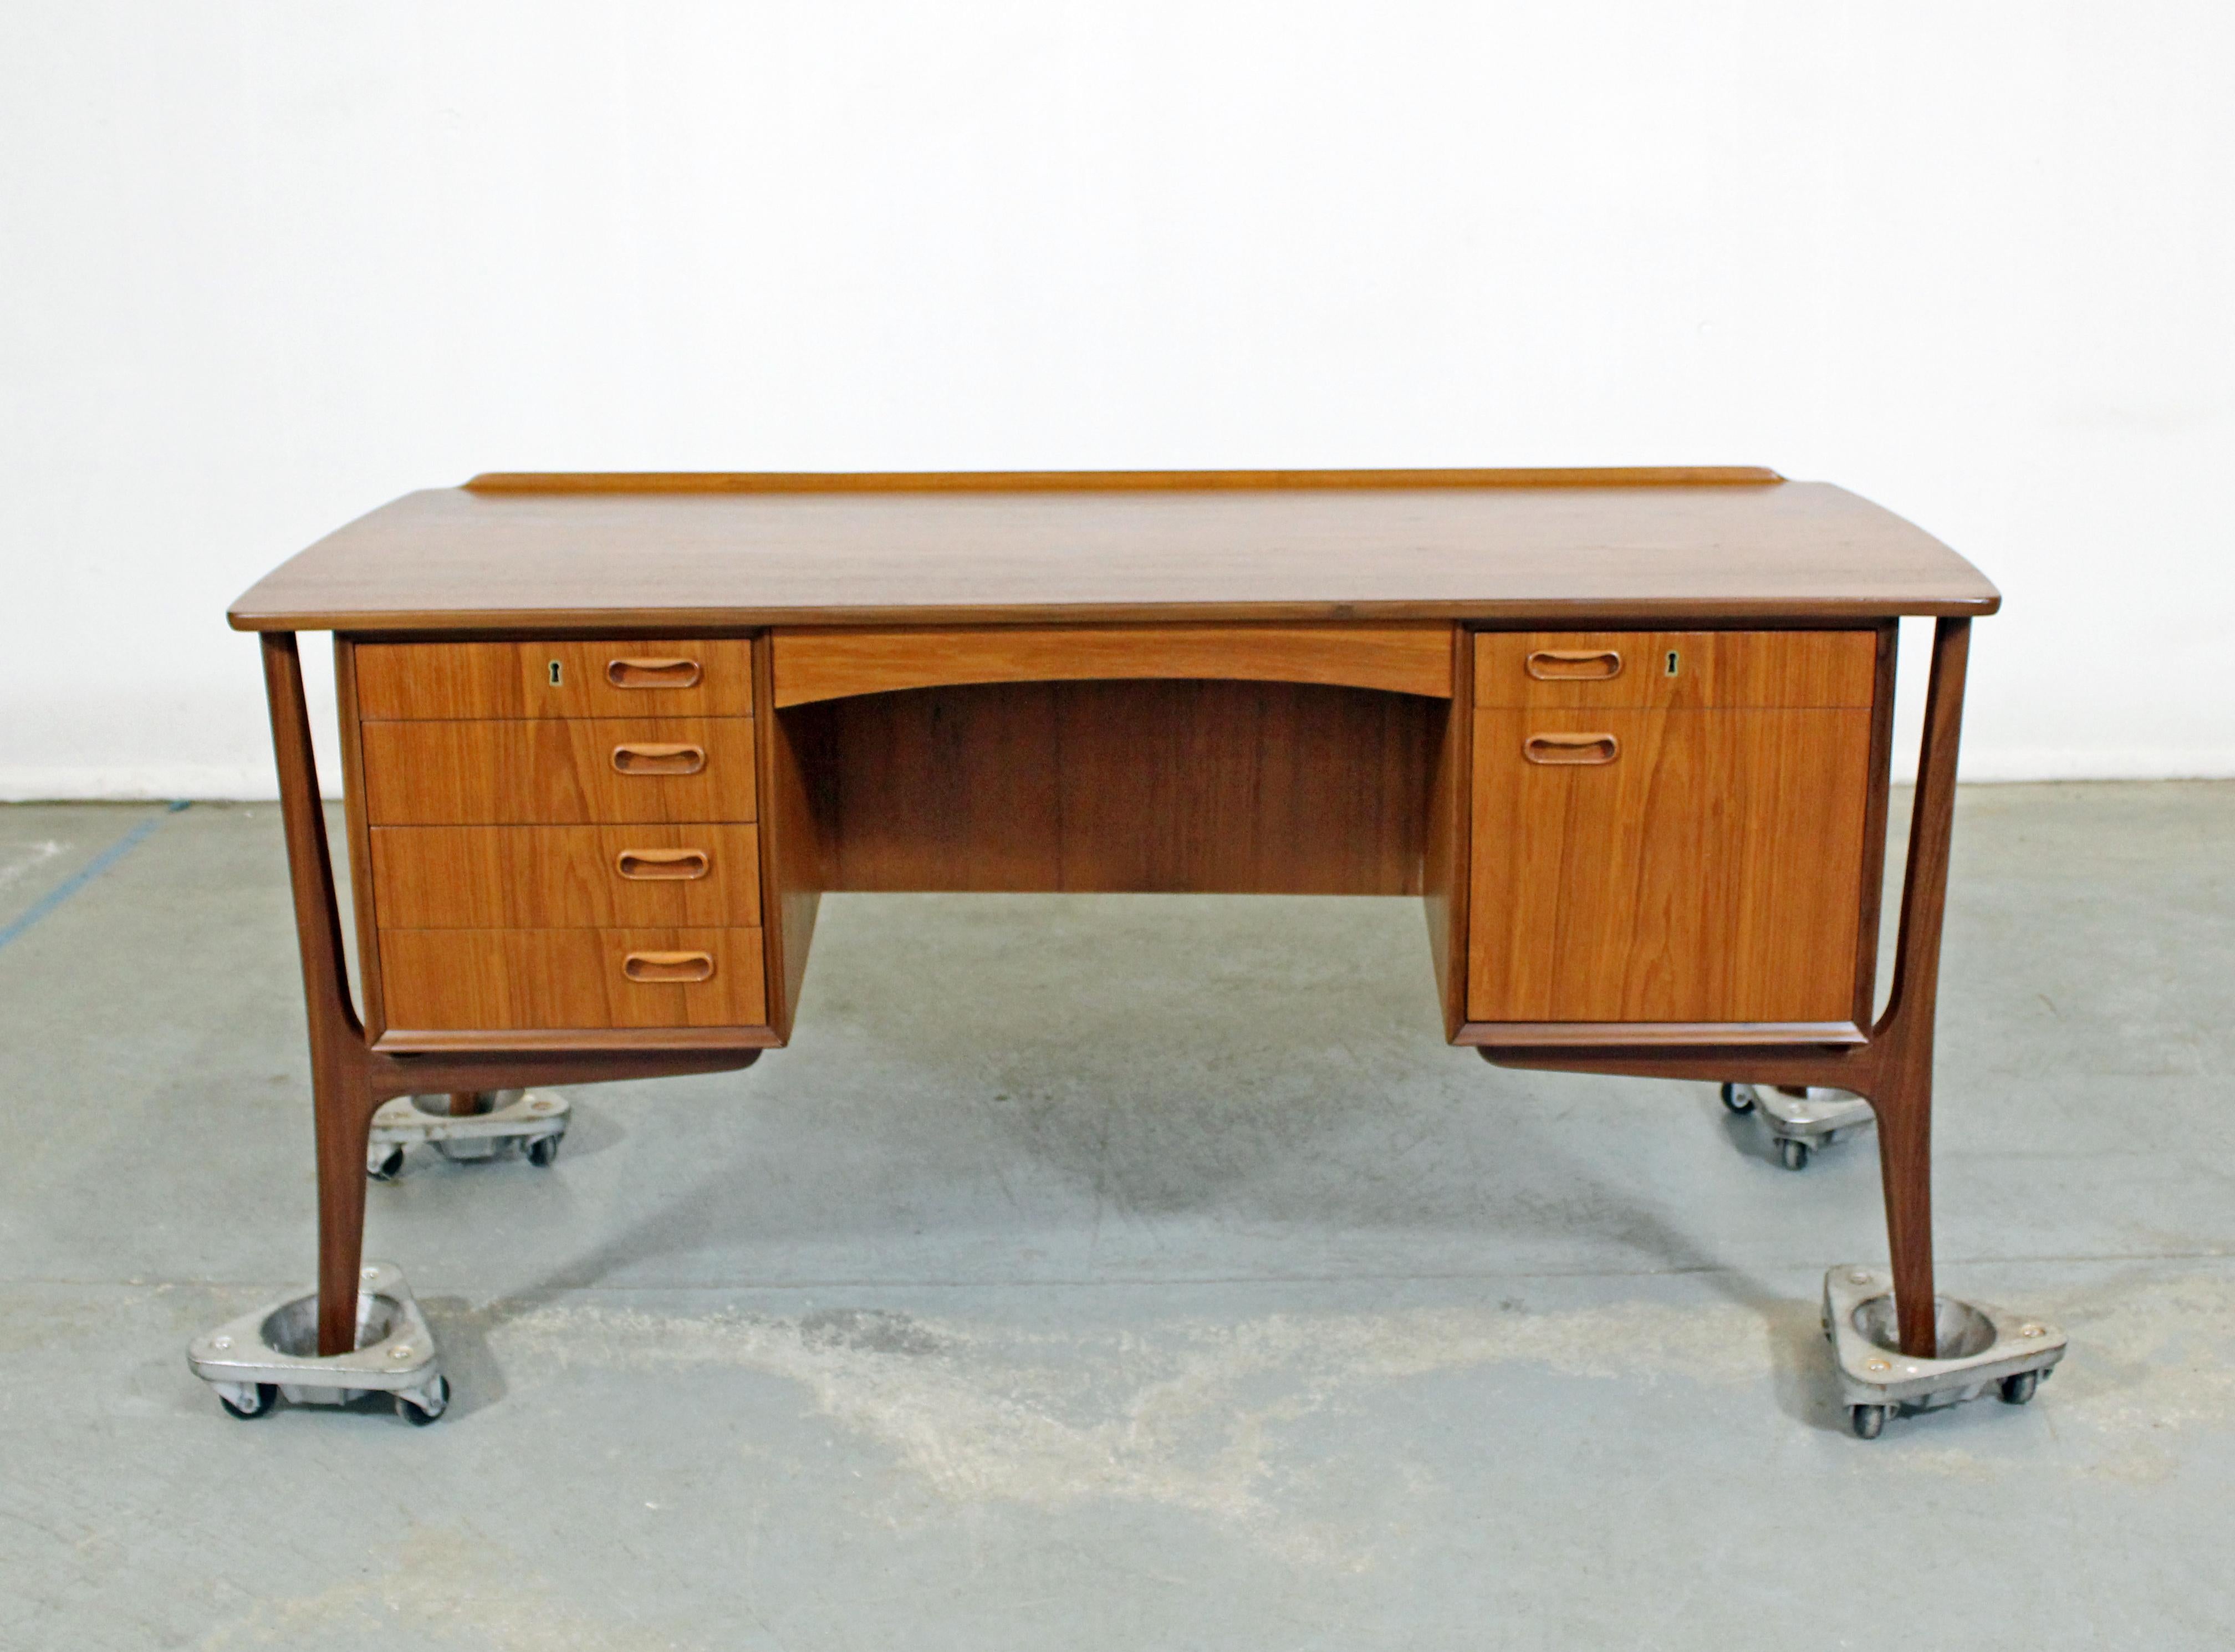 Offered is a completely restored Danish modern desk by Sven Aage Madsen. Has been professionally refinished. This piece is made of teak with a floating frame and beautifully sculpted legs. Includes 6 drawers, two with locks and including one for